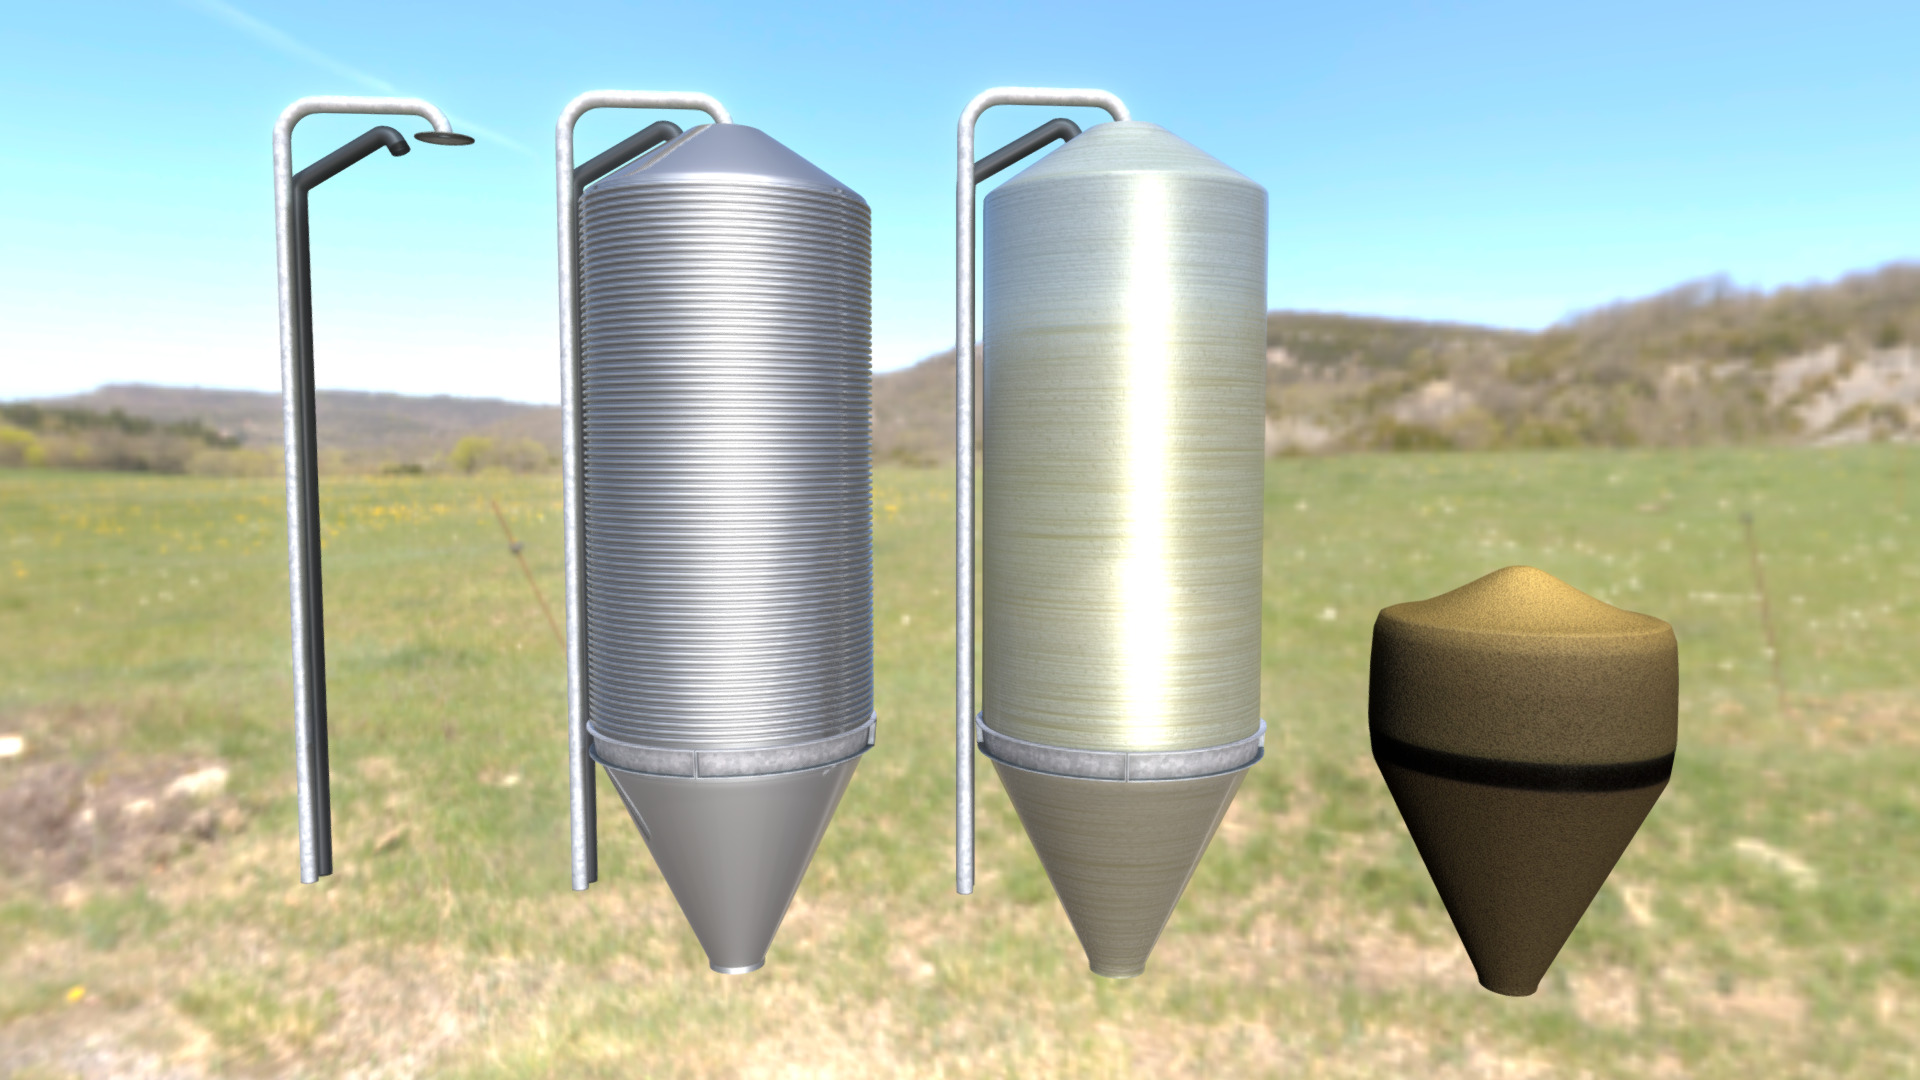 3D model Corn Silo (WIP-1) - This is a 3D model of the Corn Silo (WIP-1). The 3D model is about a couple of metal cylinders in a grassy field.